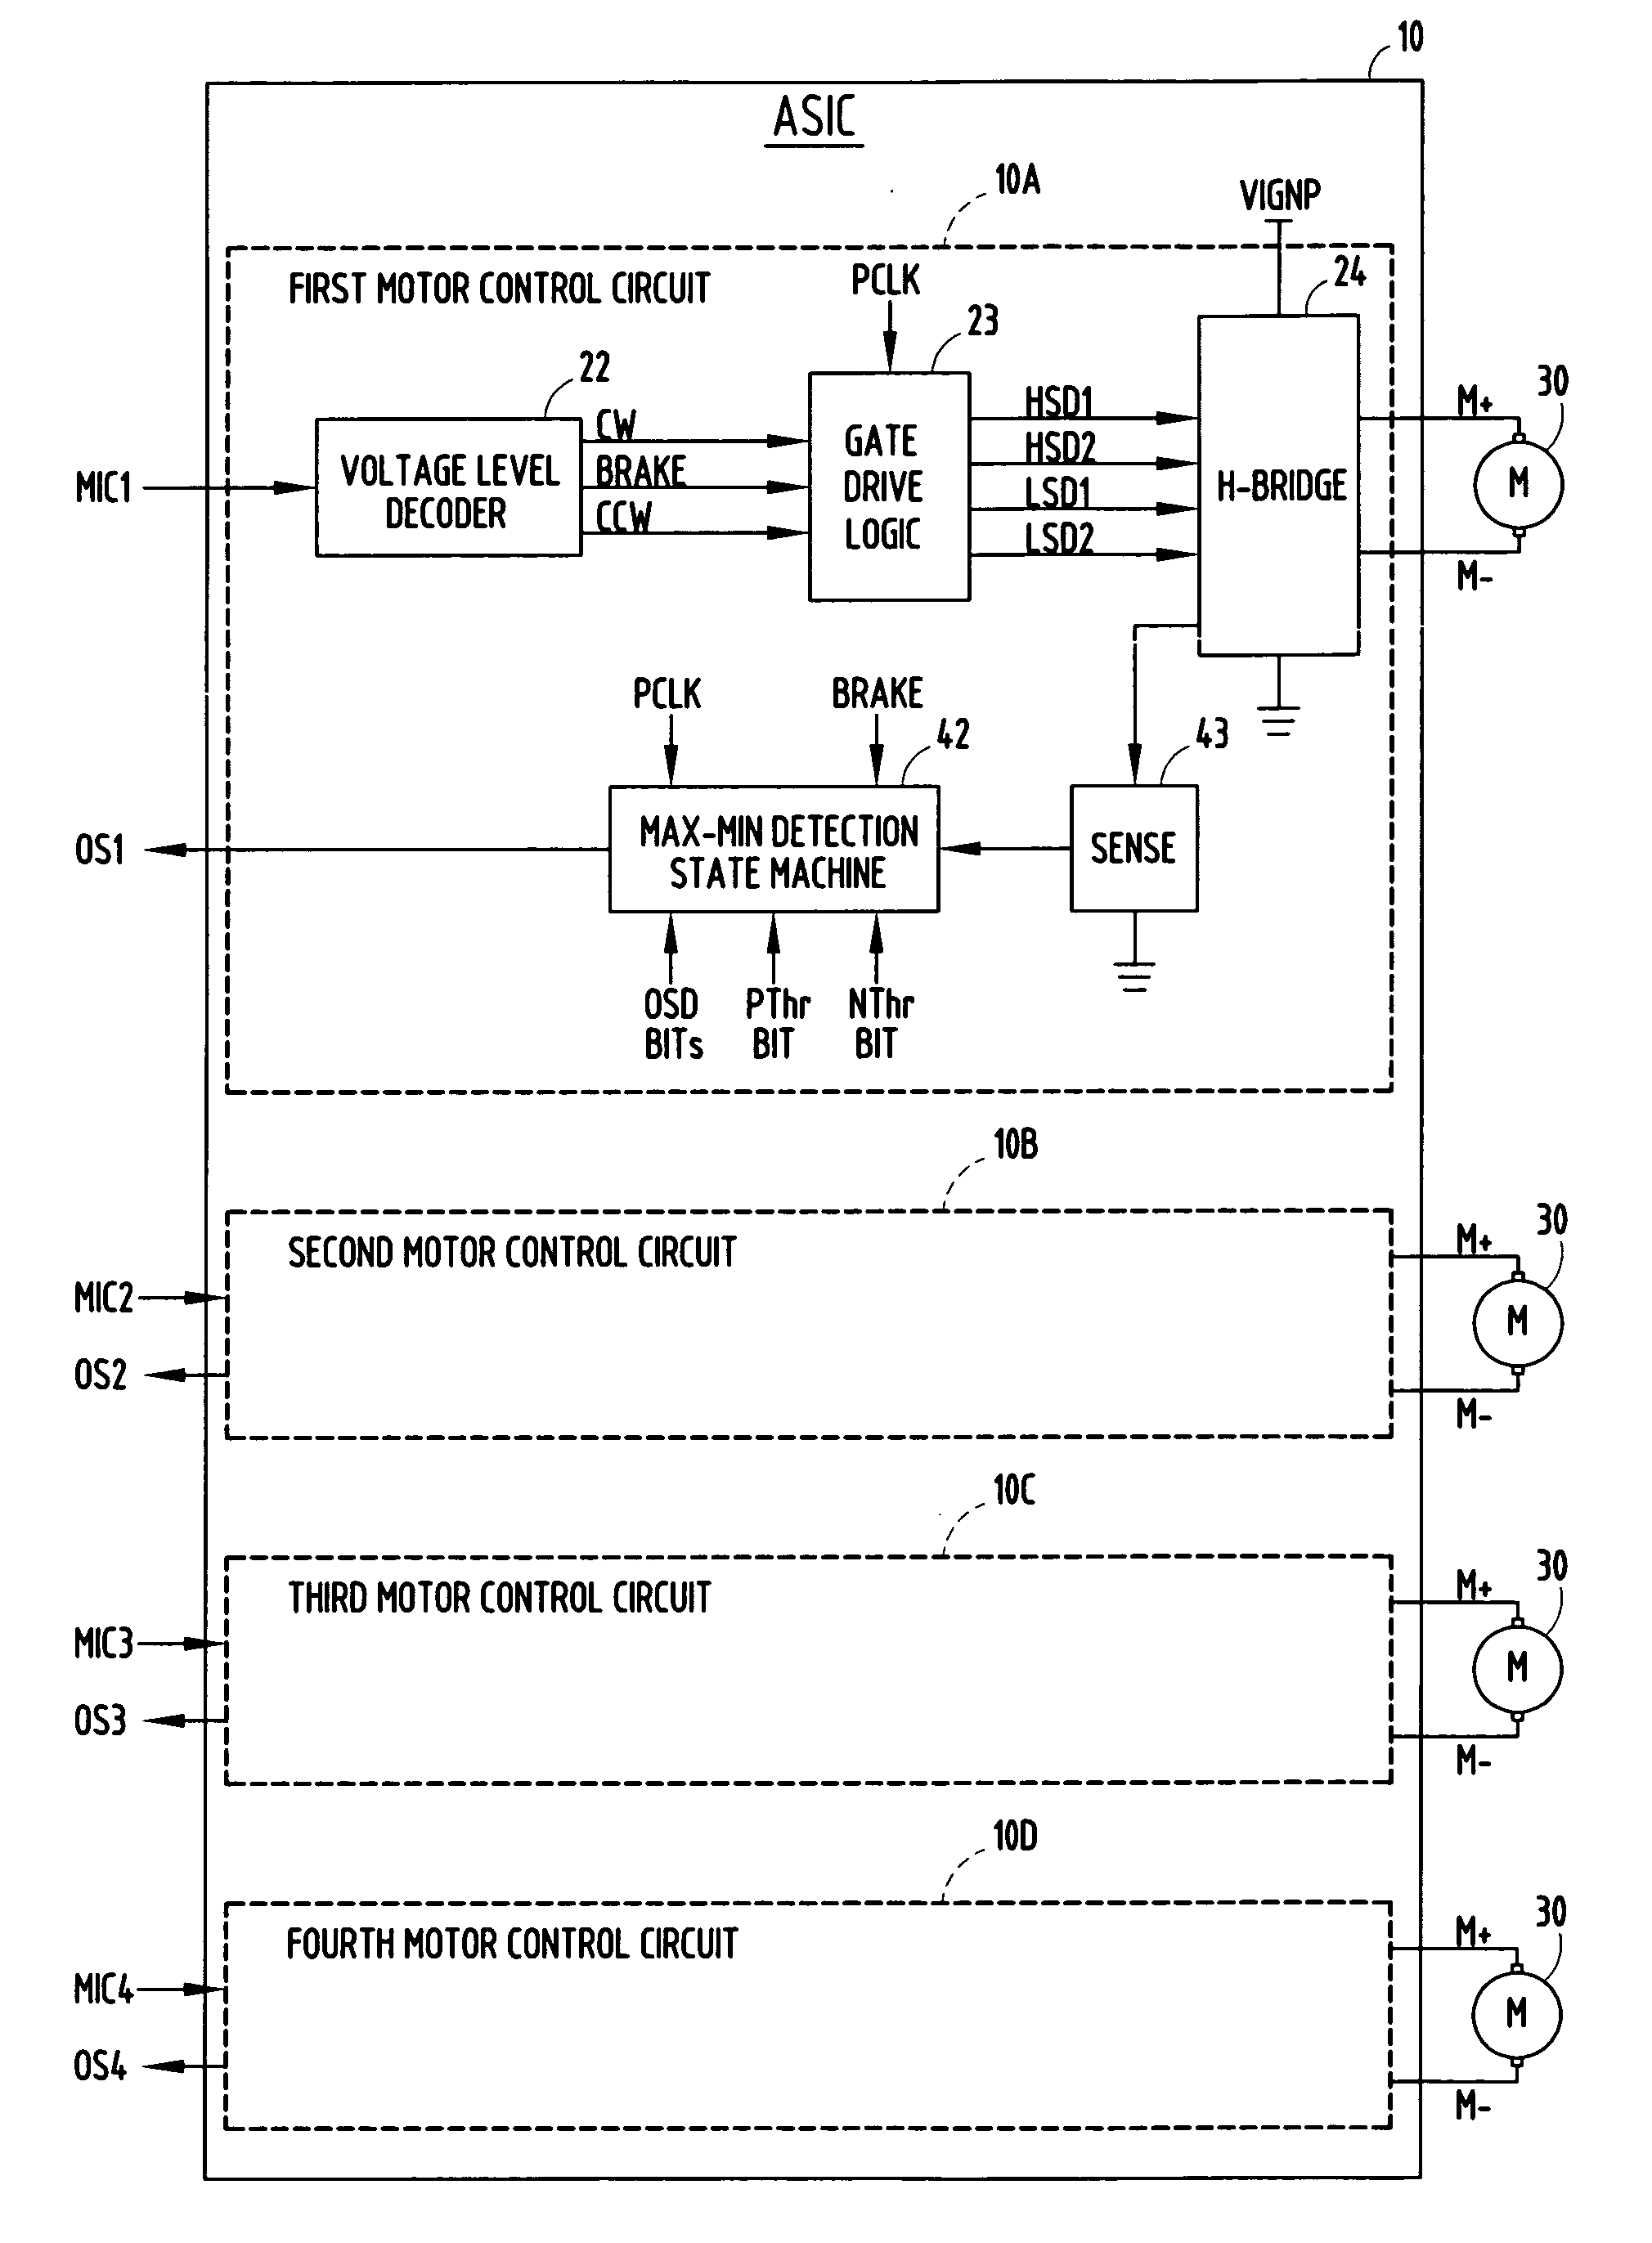 Position detection and external driver multiplexing system for DC motors